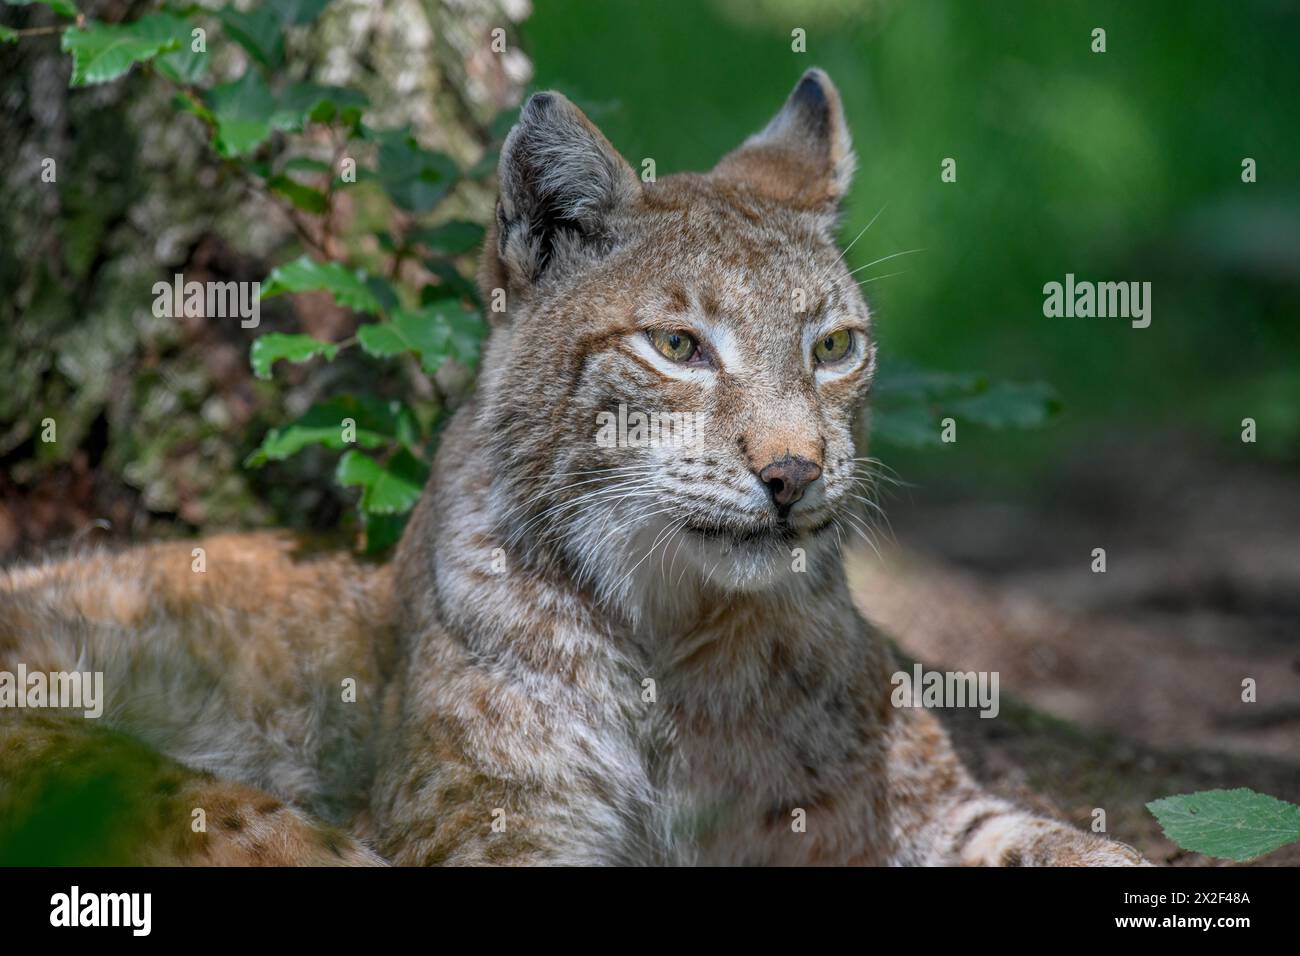 Zoologie, mammifère (mammalia), lynx eurasien (Lynx Lynx), captive, Bavière, Allemagne, ADDITIONAL-RIGHTS-LEARANCE-INFO-NOT-AVAILABLE Banque D'Images